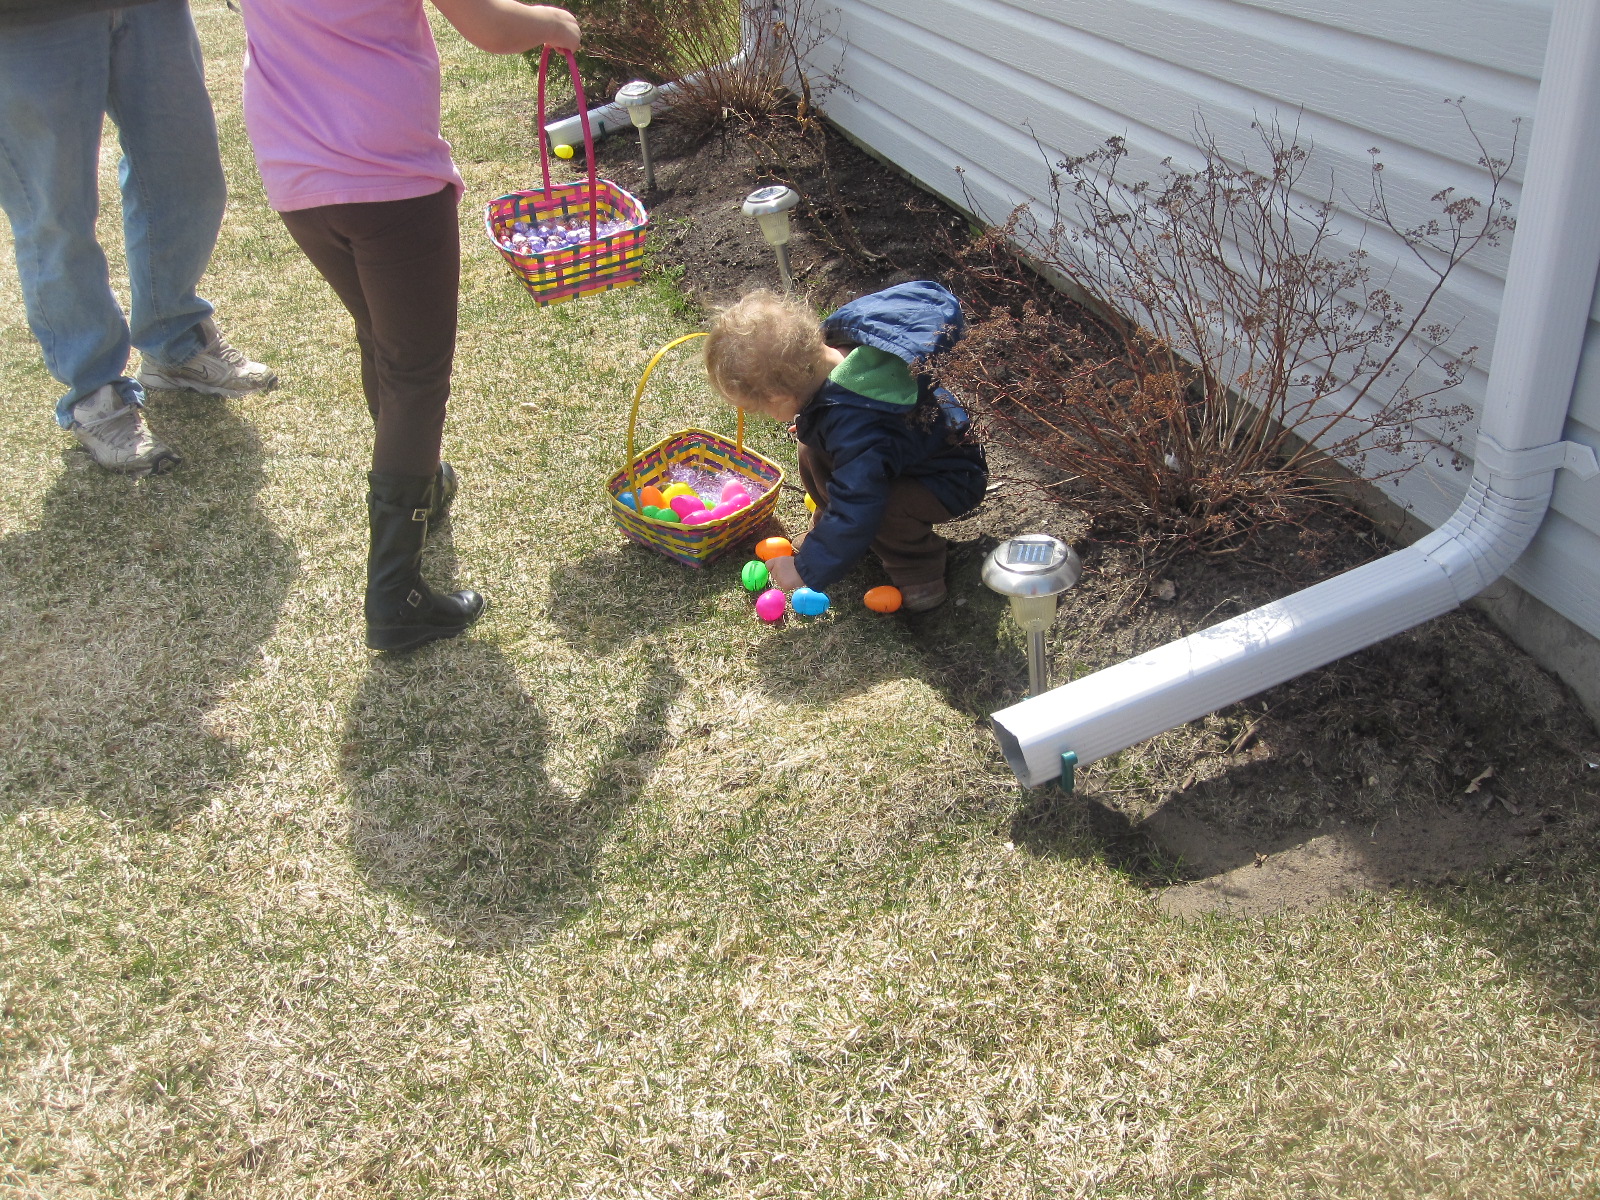 Hunting for those elusive eggs at Easter...